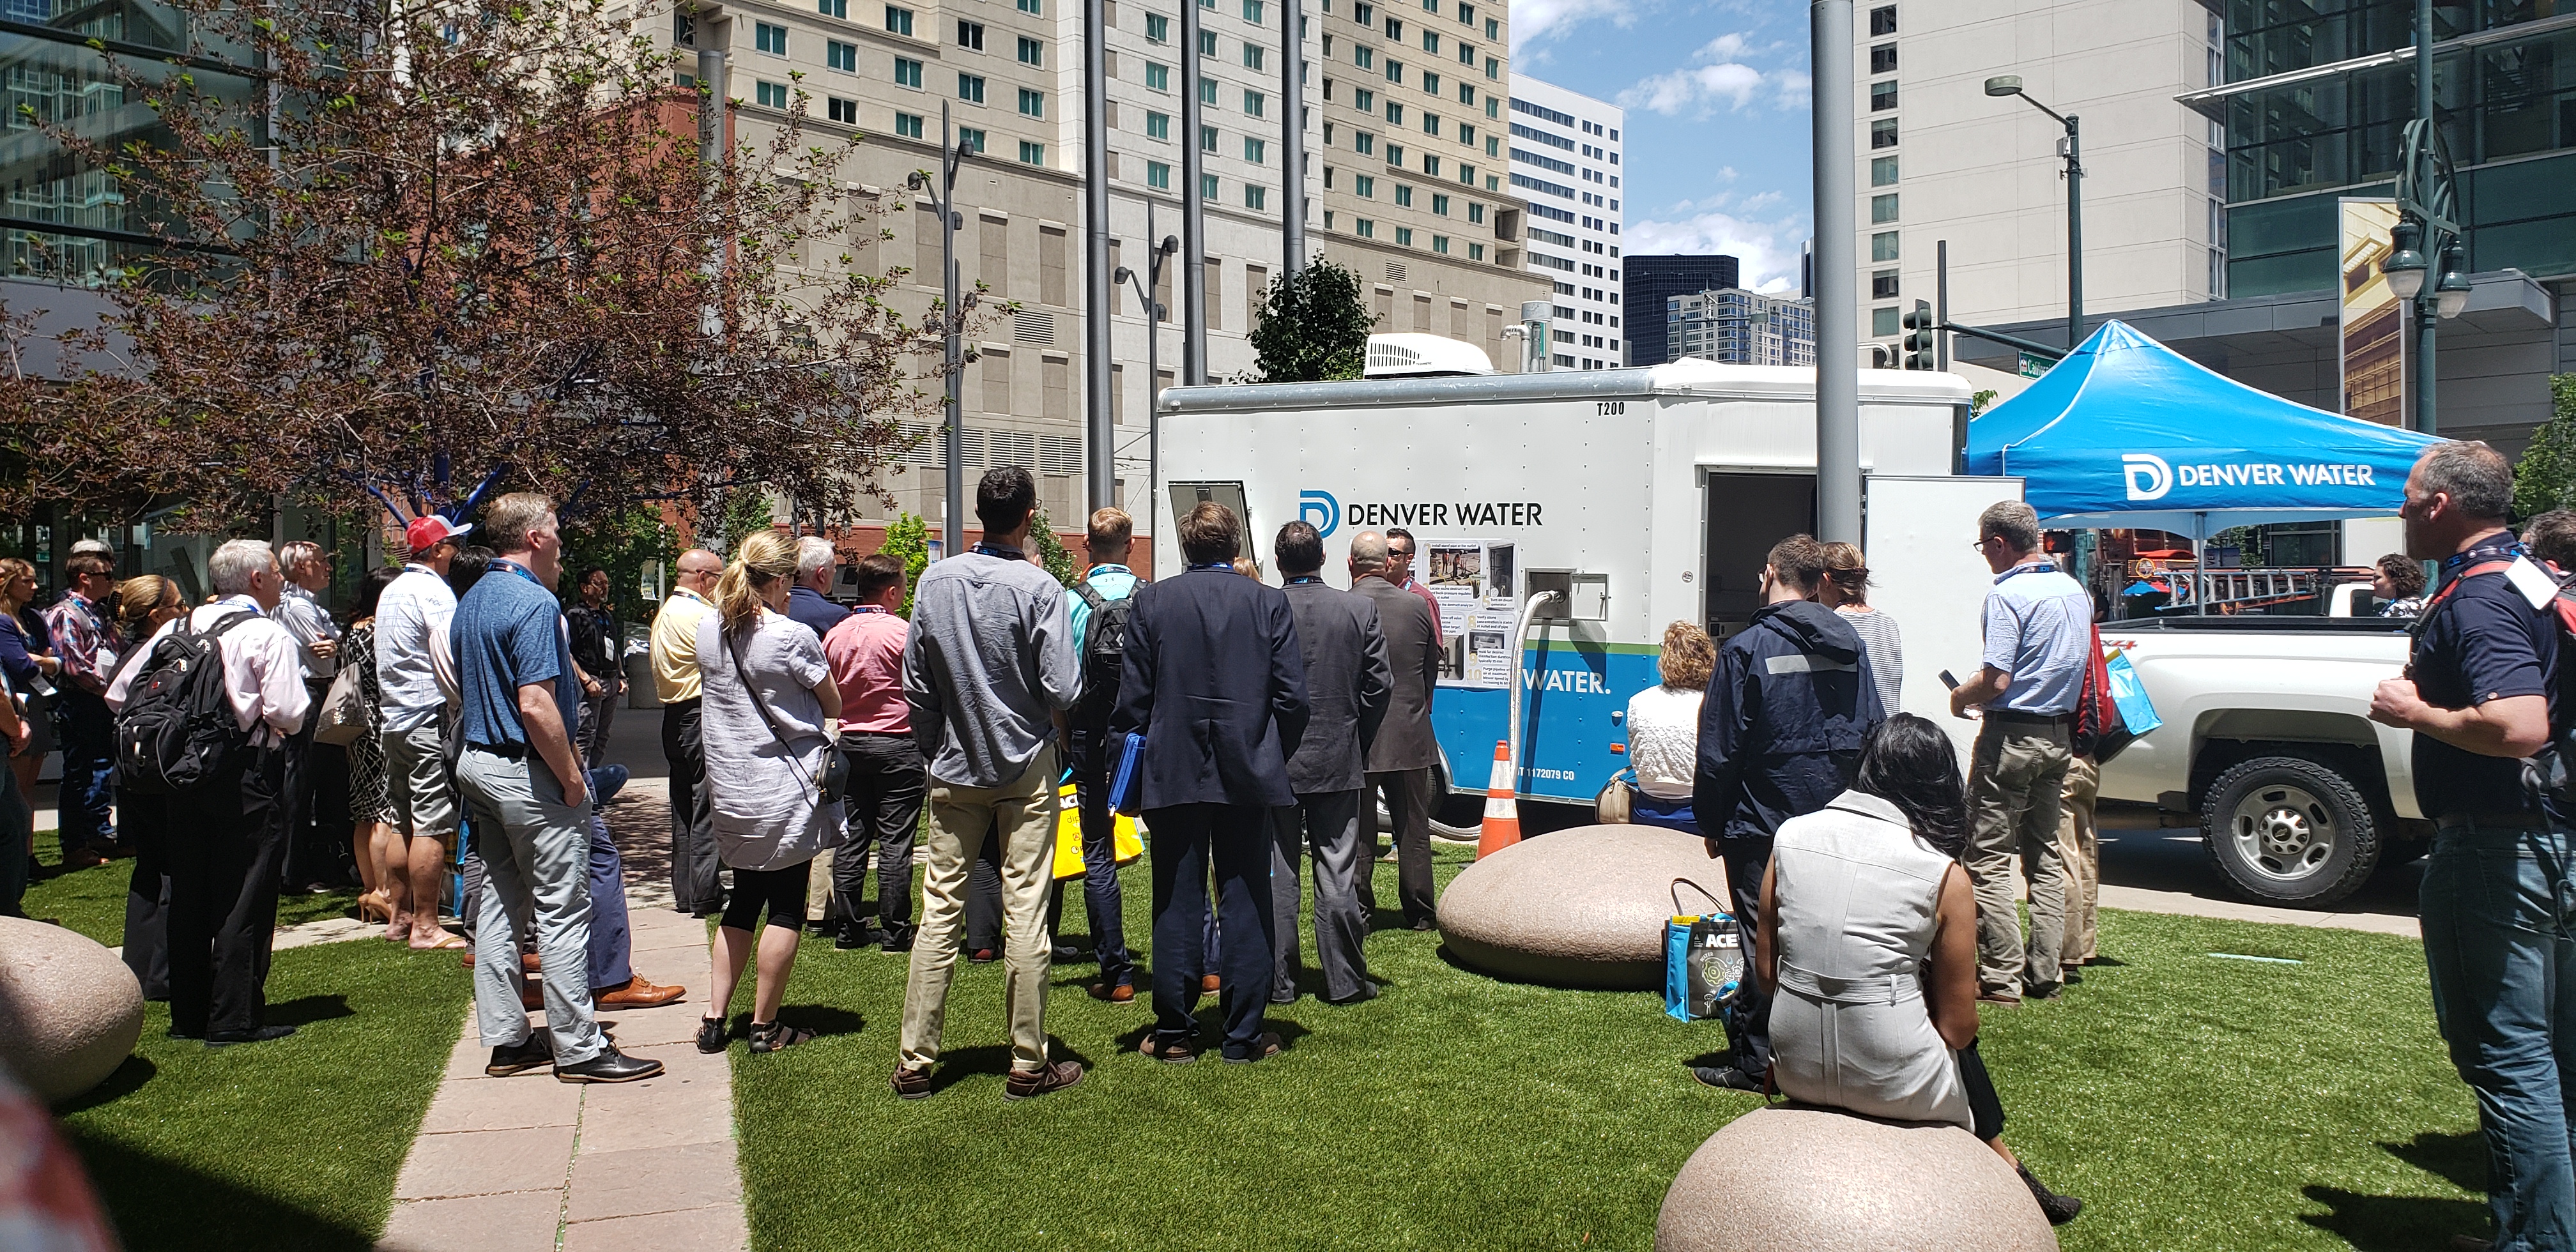 A Denver Water trailer and tend is surrounded by a crowd.